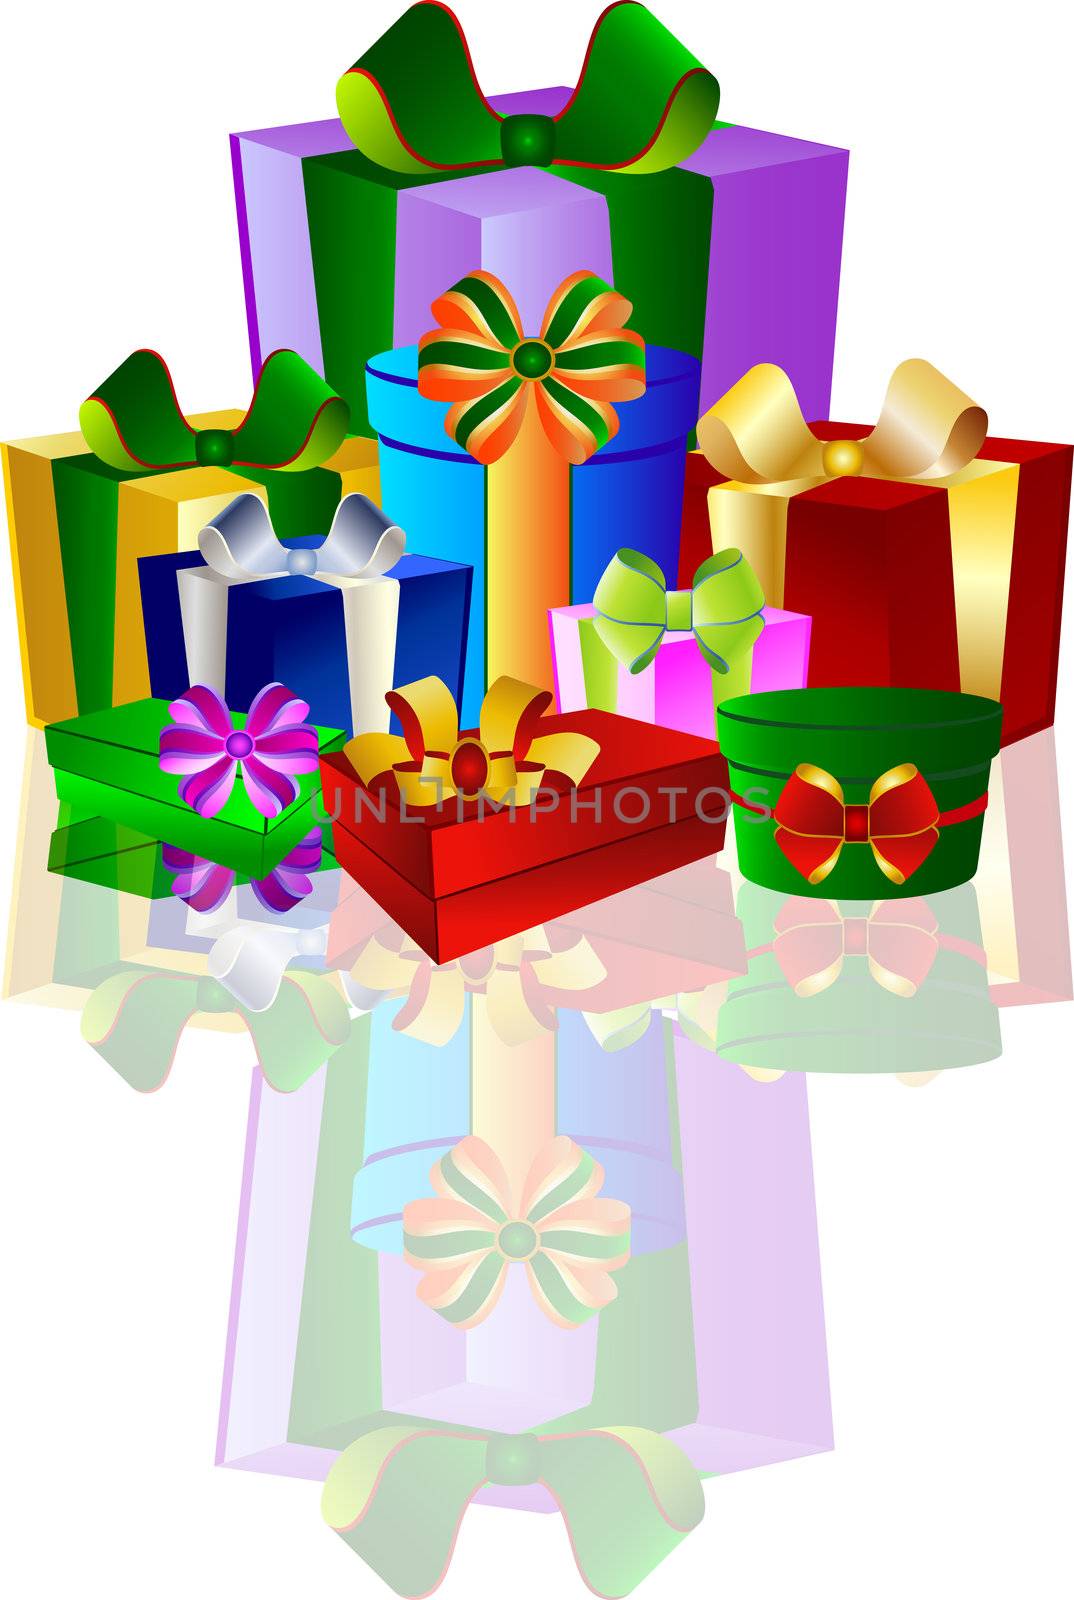 Colorful Gift Boxes on white Background by peromarketing